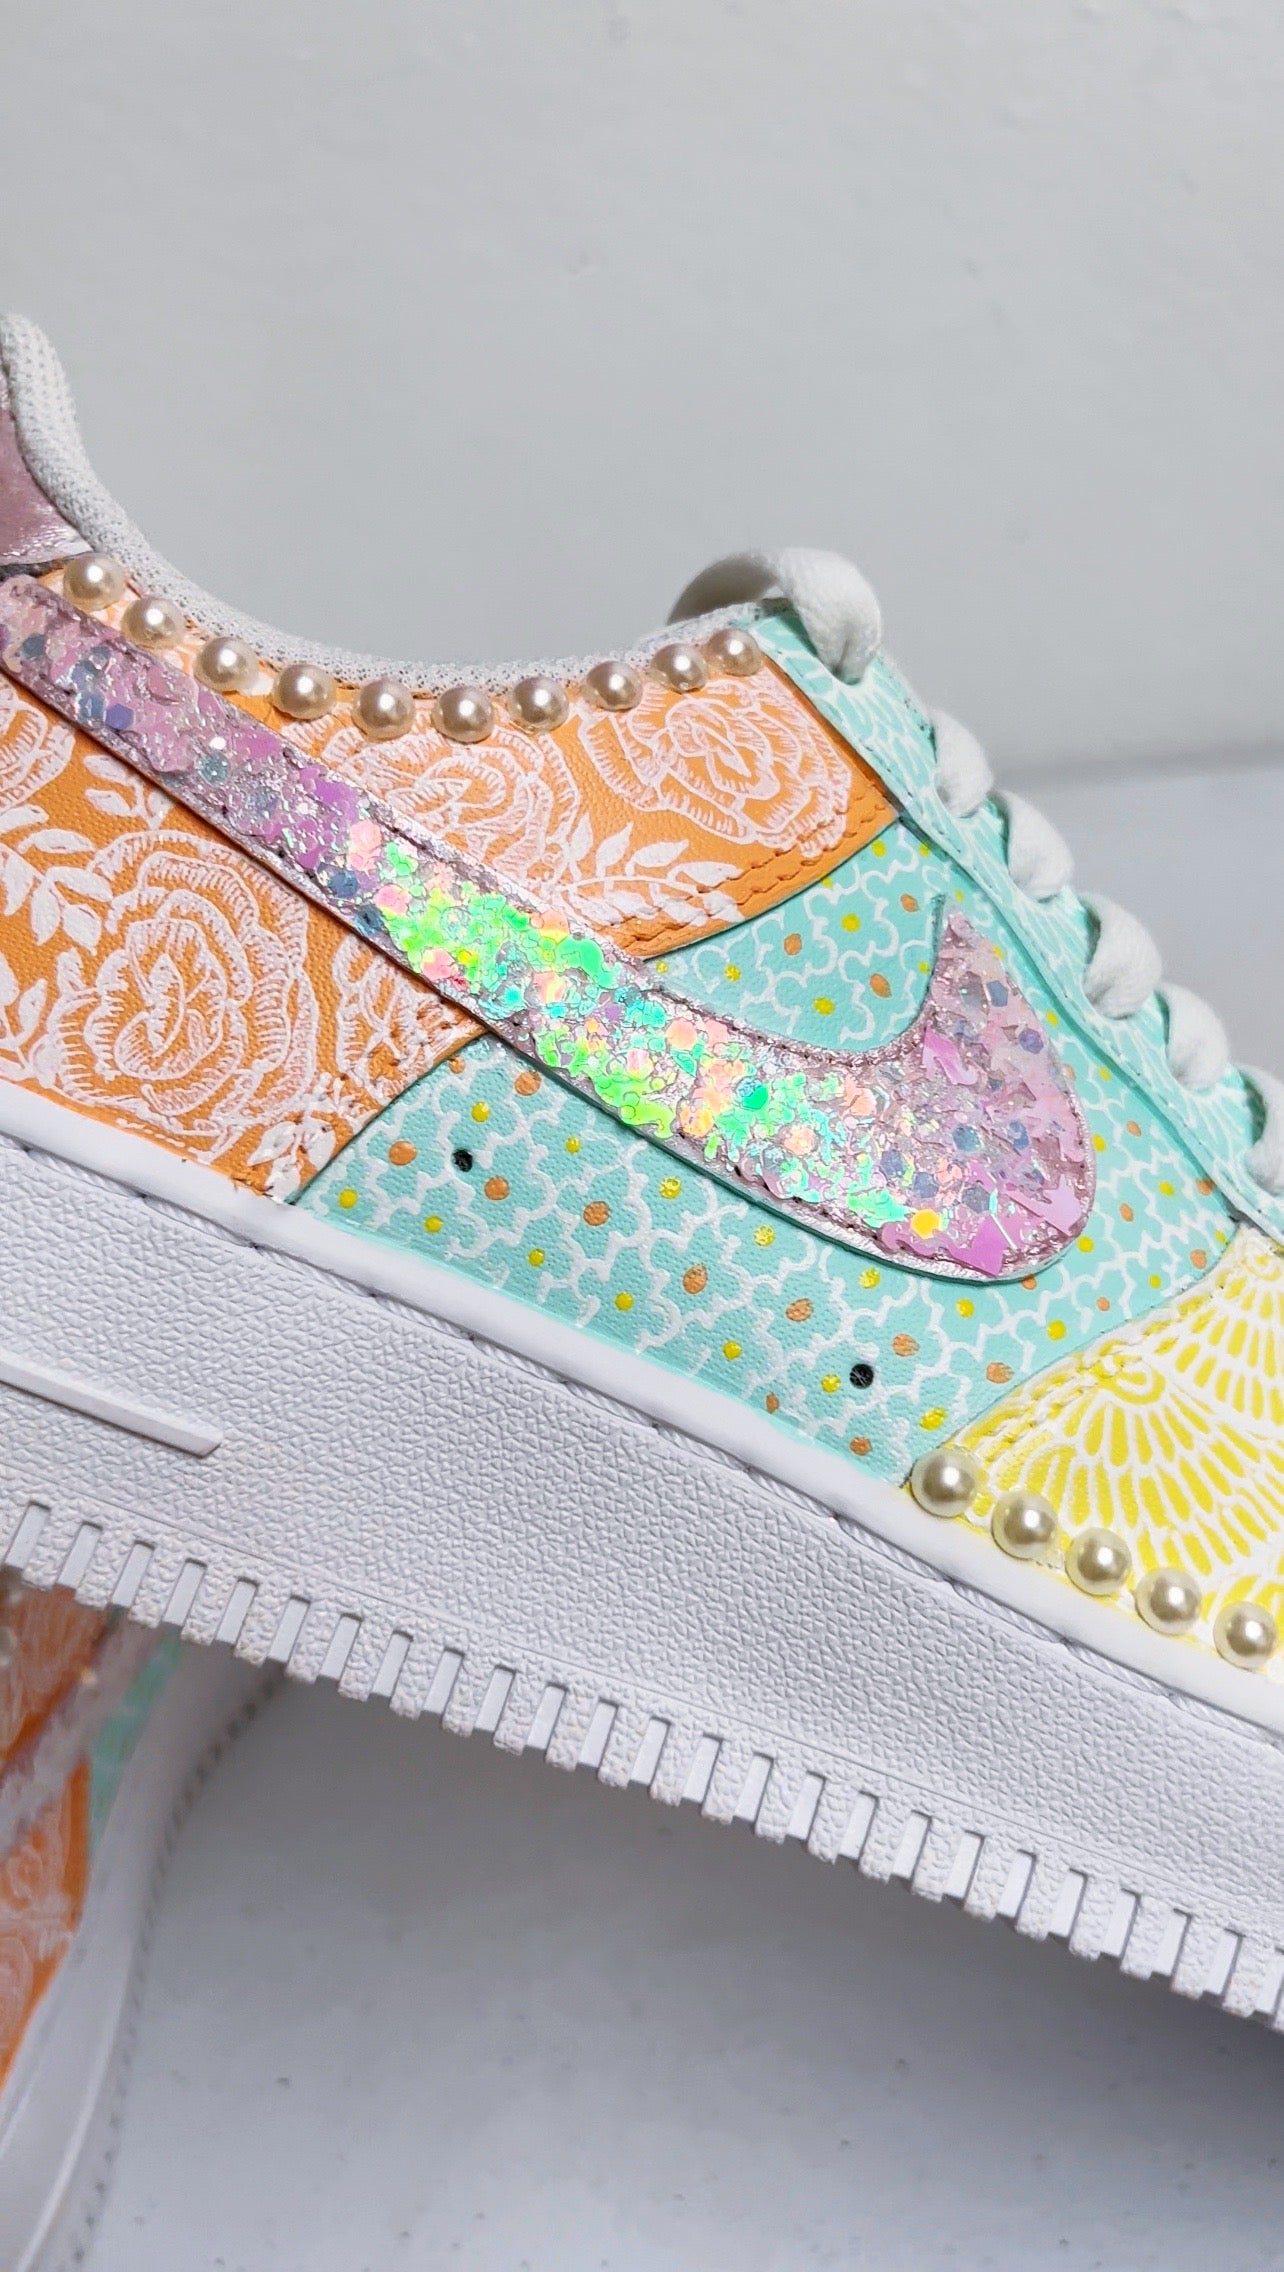 "Devi" Hand Painted and Embellished Nike AF1 '07, W 9.5 / M 8